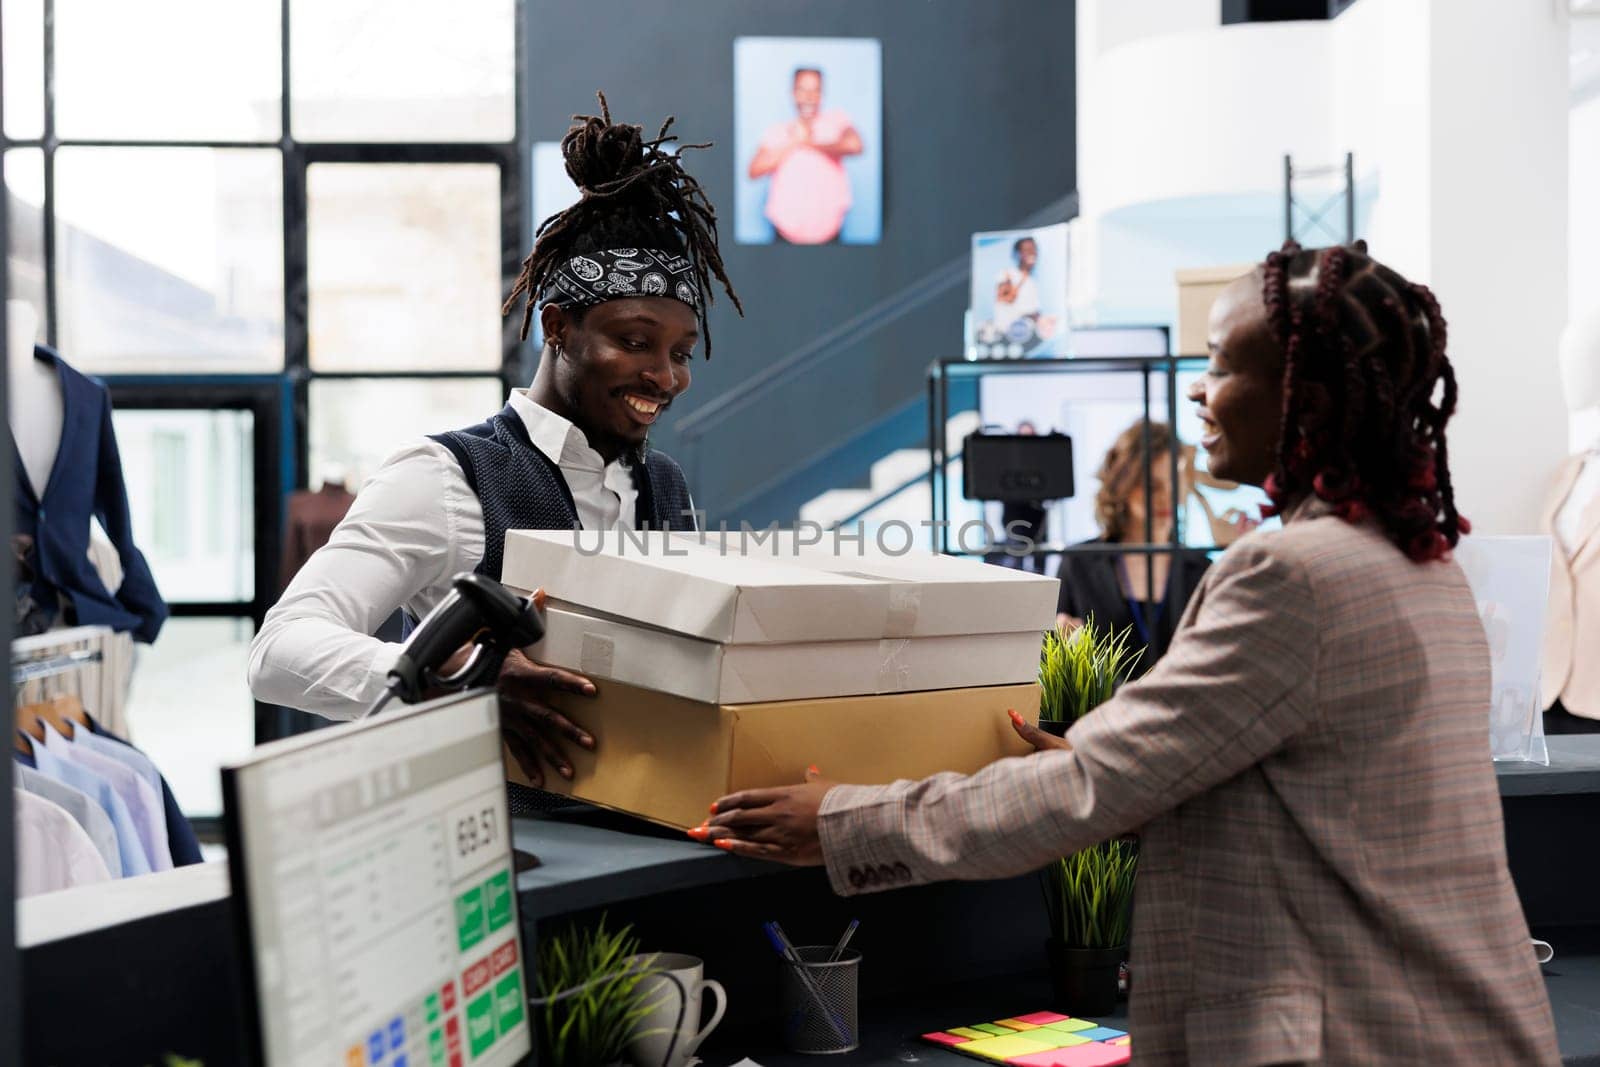 African american shopper holding packages fiiled with fashionable clothes, paying for merchandise at cash register in showroom. Customer buying stylish fashion collection, commercial activity